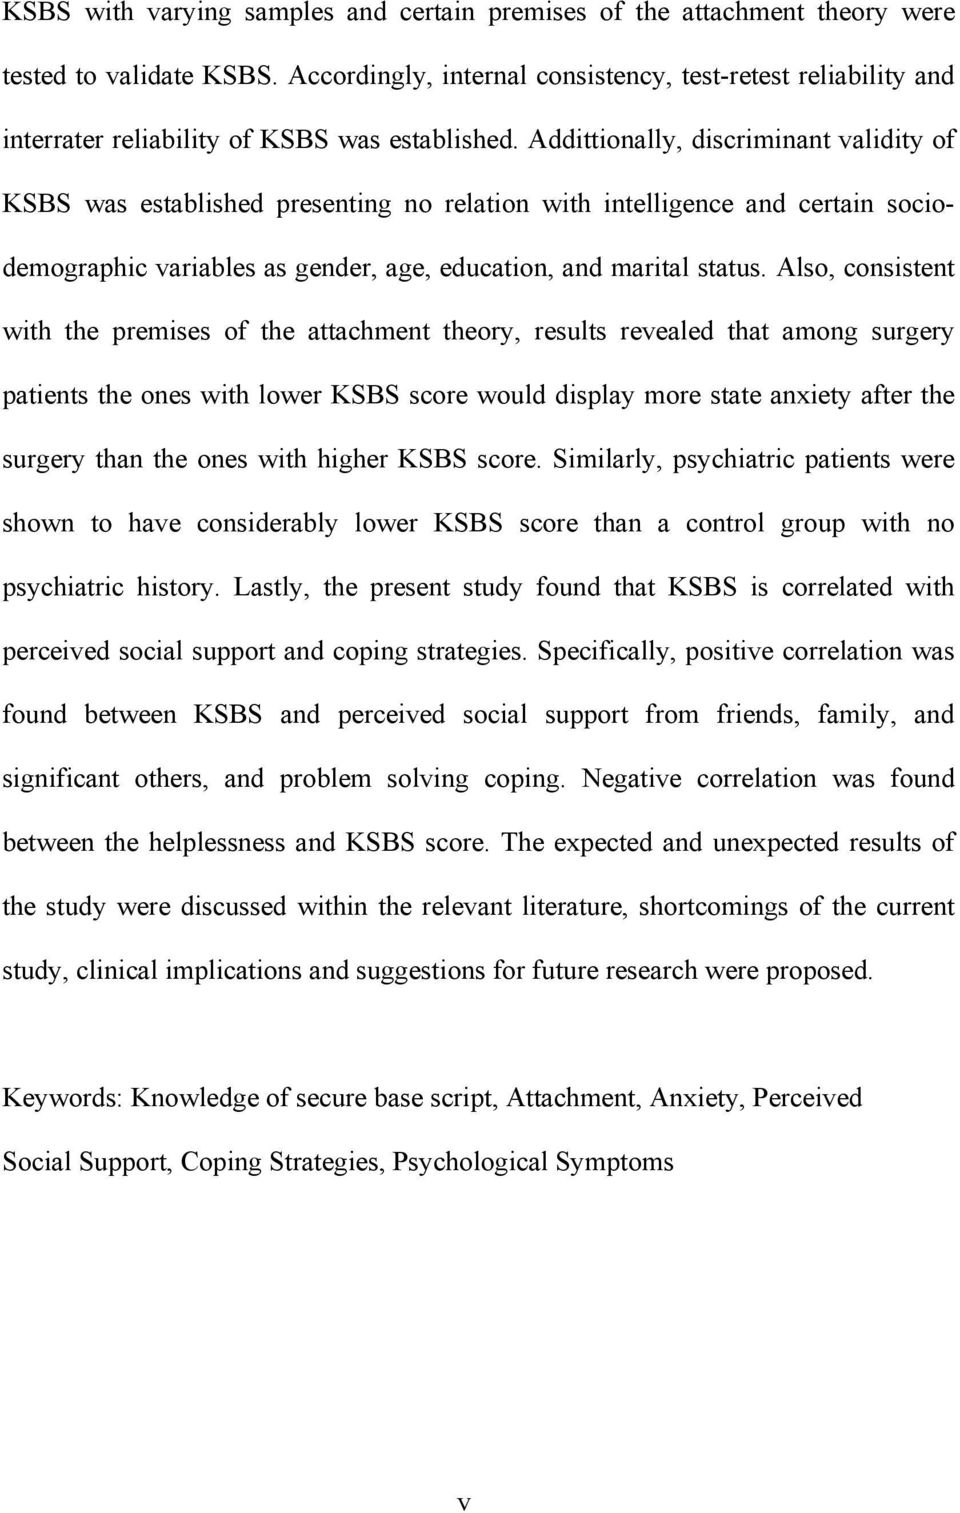 Addittionally, discriminant validity of KSBS was established presenting no relation with intelligence and certain sociodemographic variables as gender, age, education, and marital status.